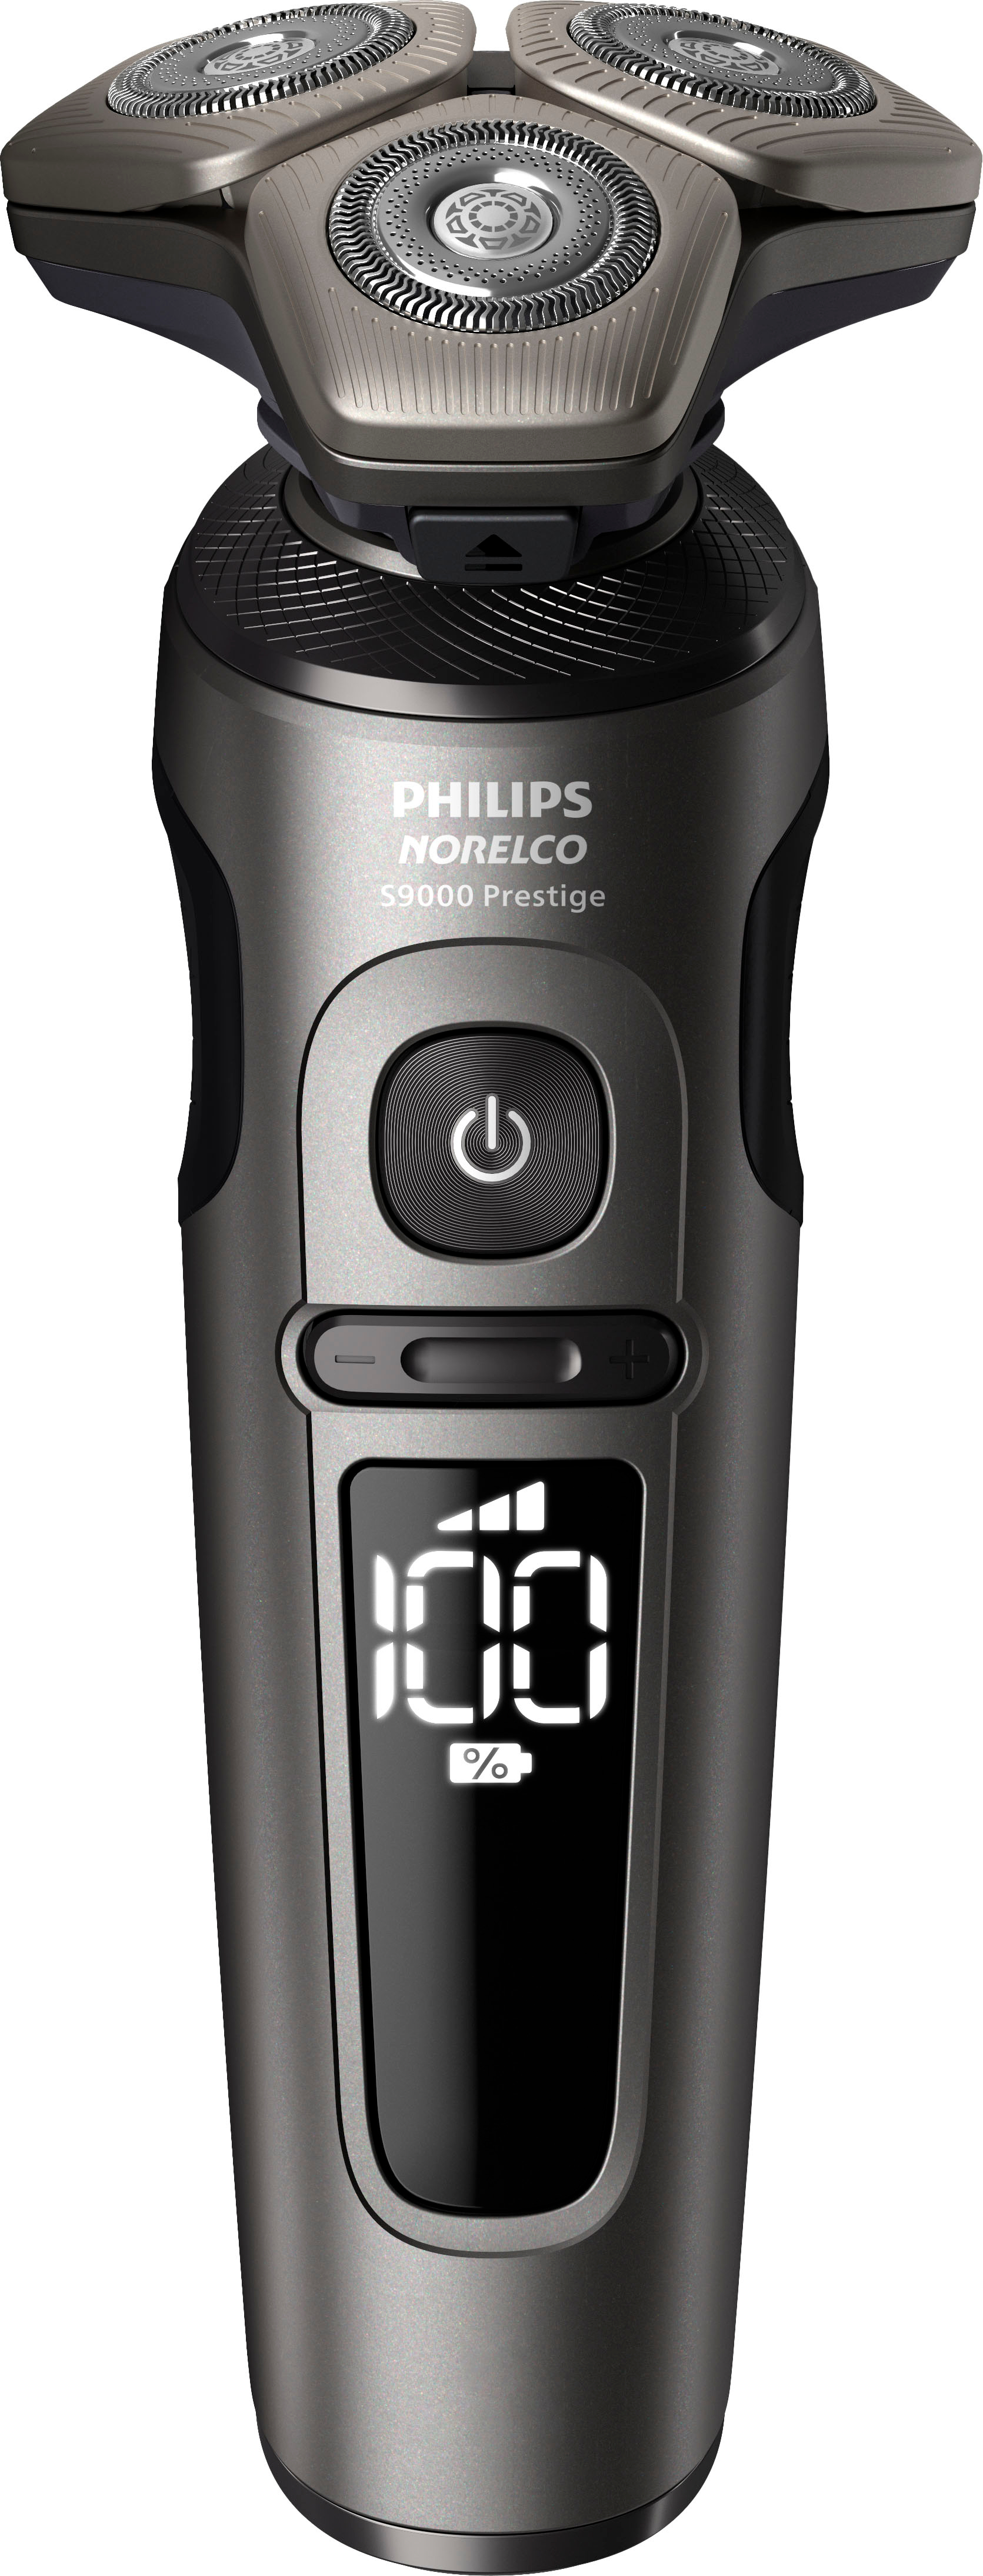 Philips Norelco 9000 Prestige Charging Buy Best SP9872/86 Shaver SP9872/86 Qi Black Pad with 